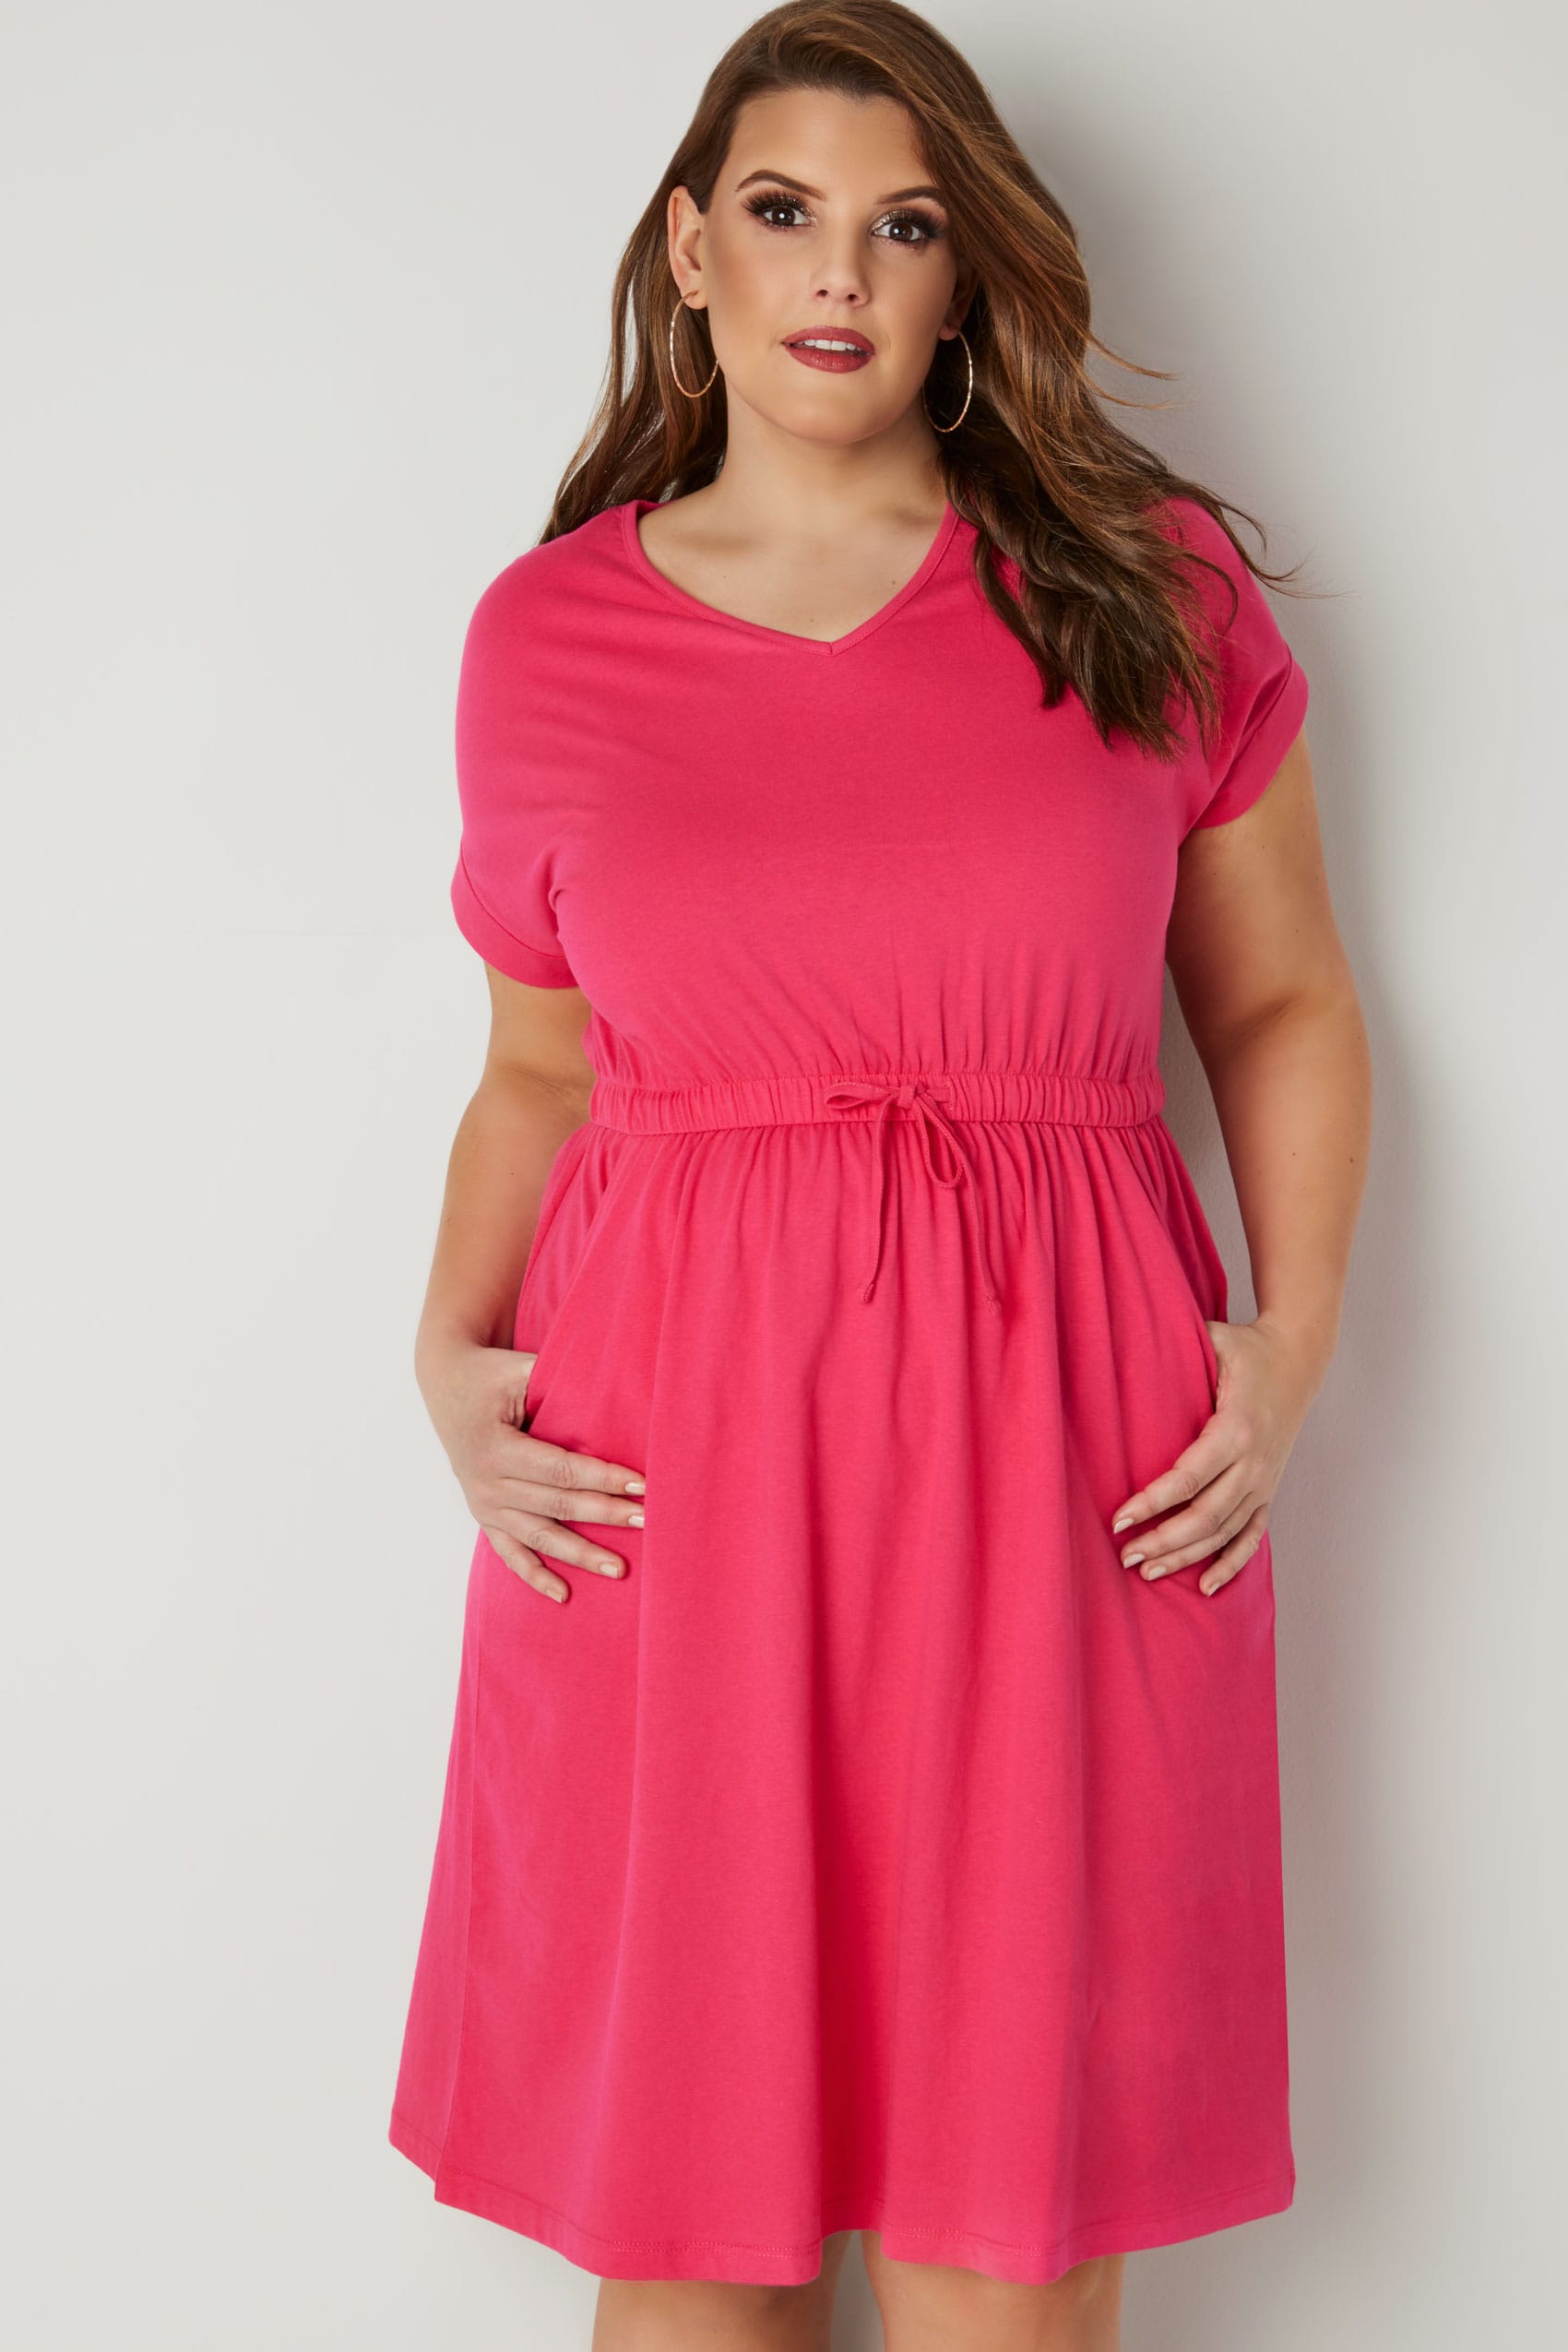 Bright Pink Jersey T-Shirt Dress With Drawstring Waist, plus size 16 to 36